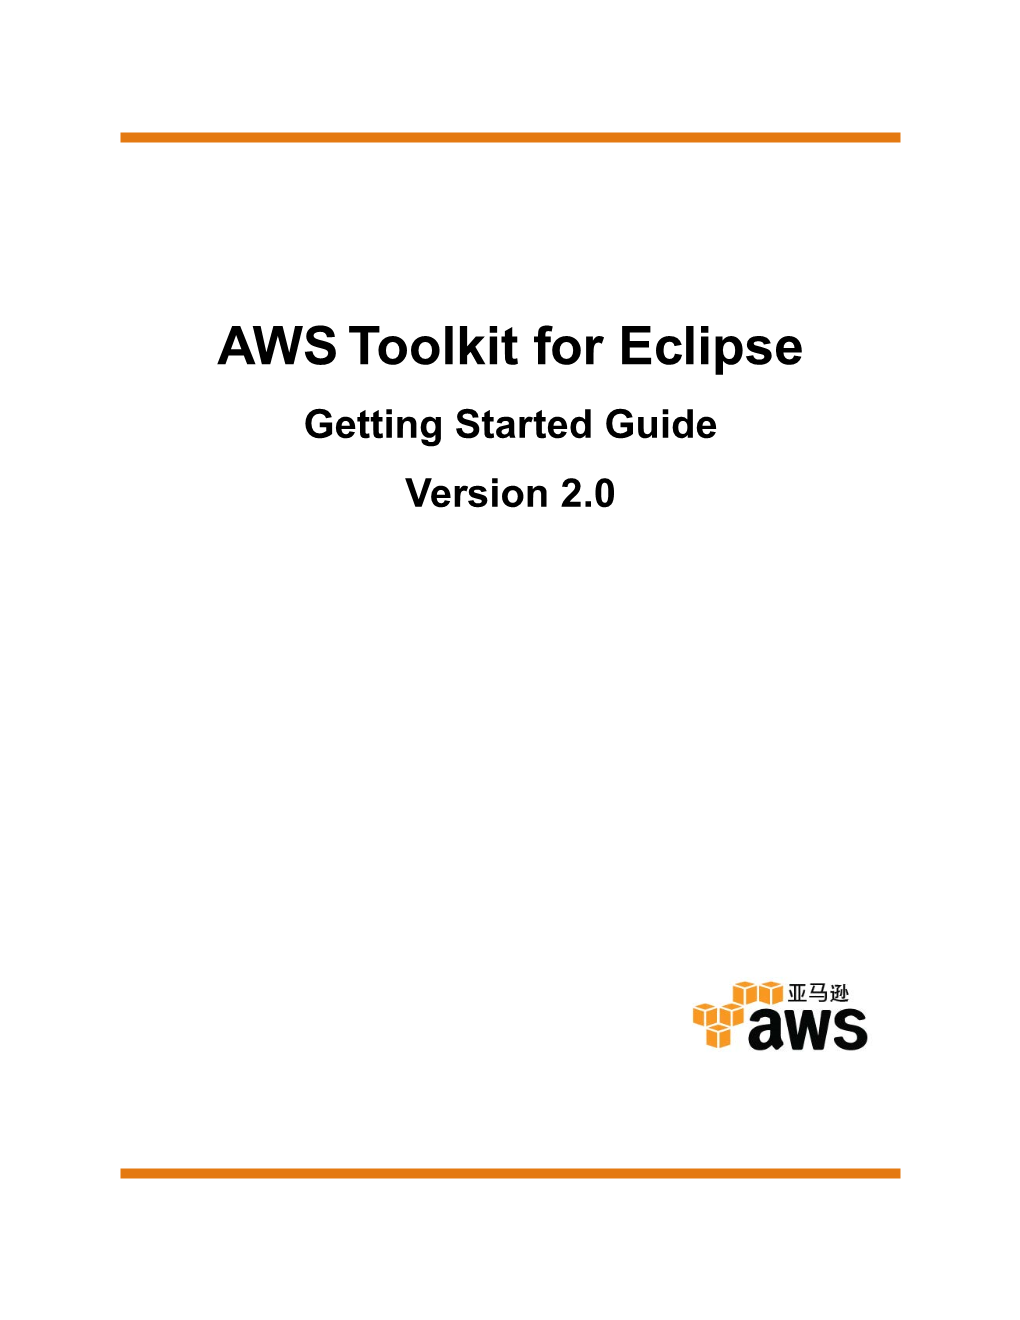 AWS Toolkit for Eclipse Getting Started Guide Version 2.0 AWS Toolkit for Eclipse Getting Started Guide